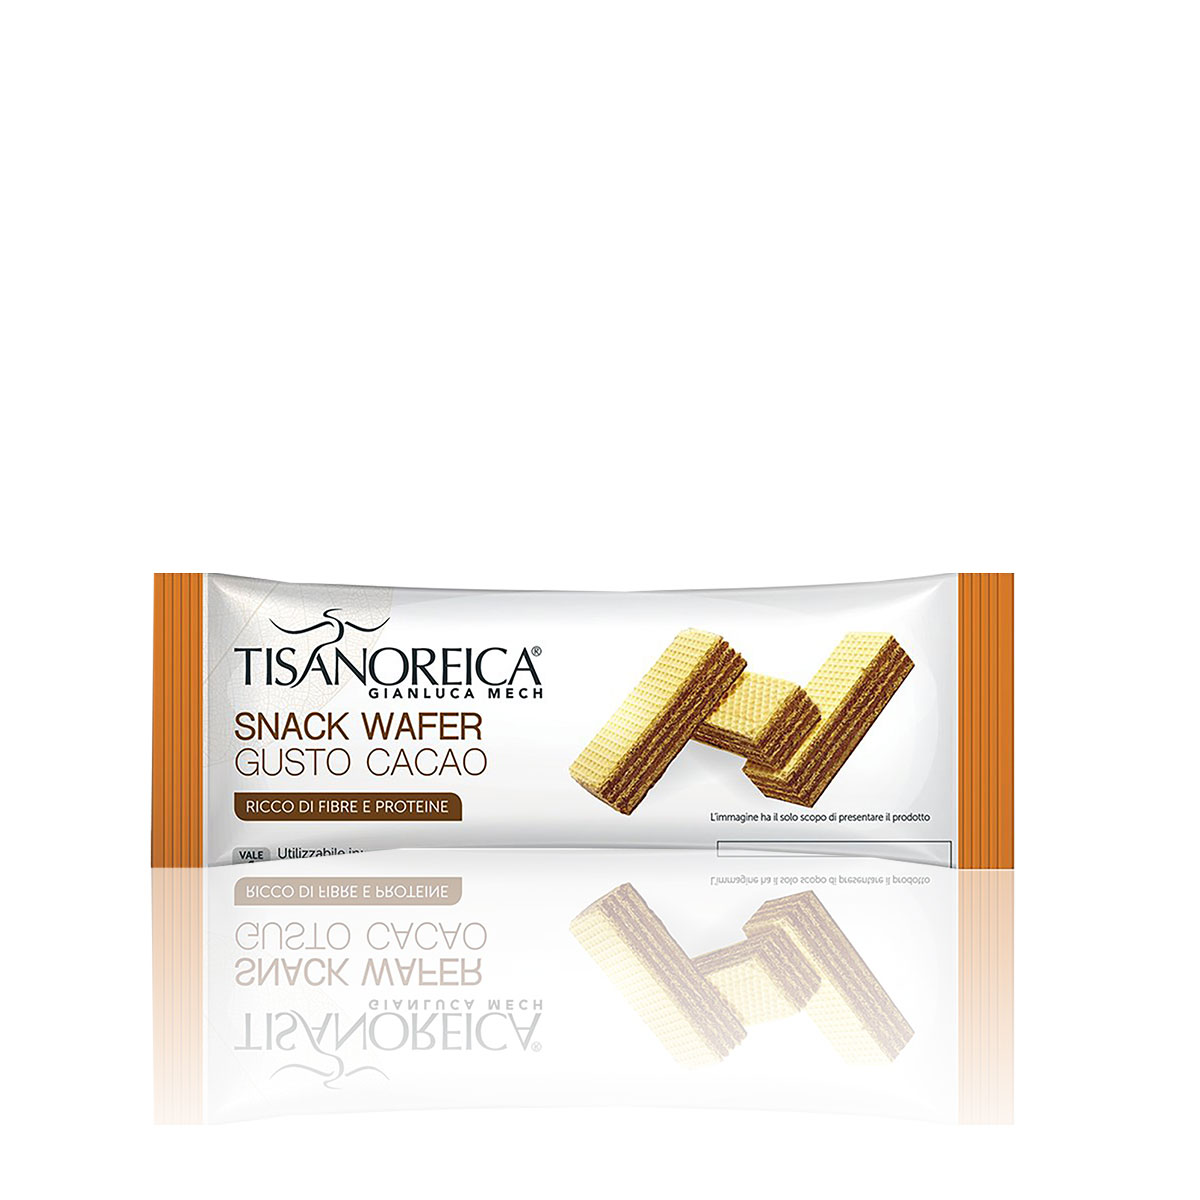 Tisanoreica Snack Wafer Gusto Cacao